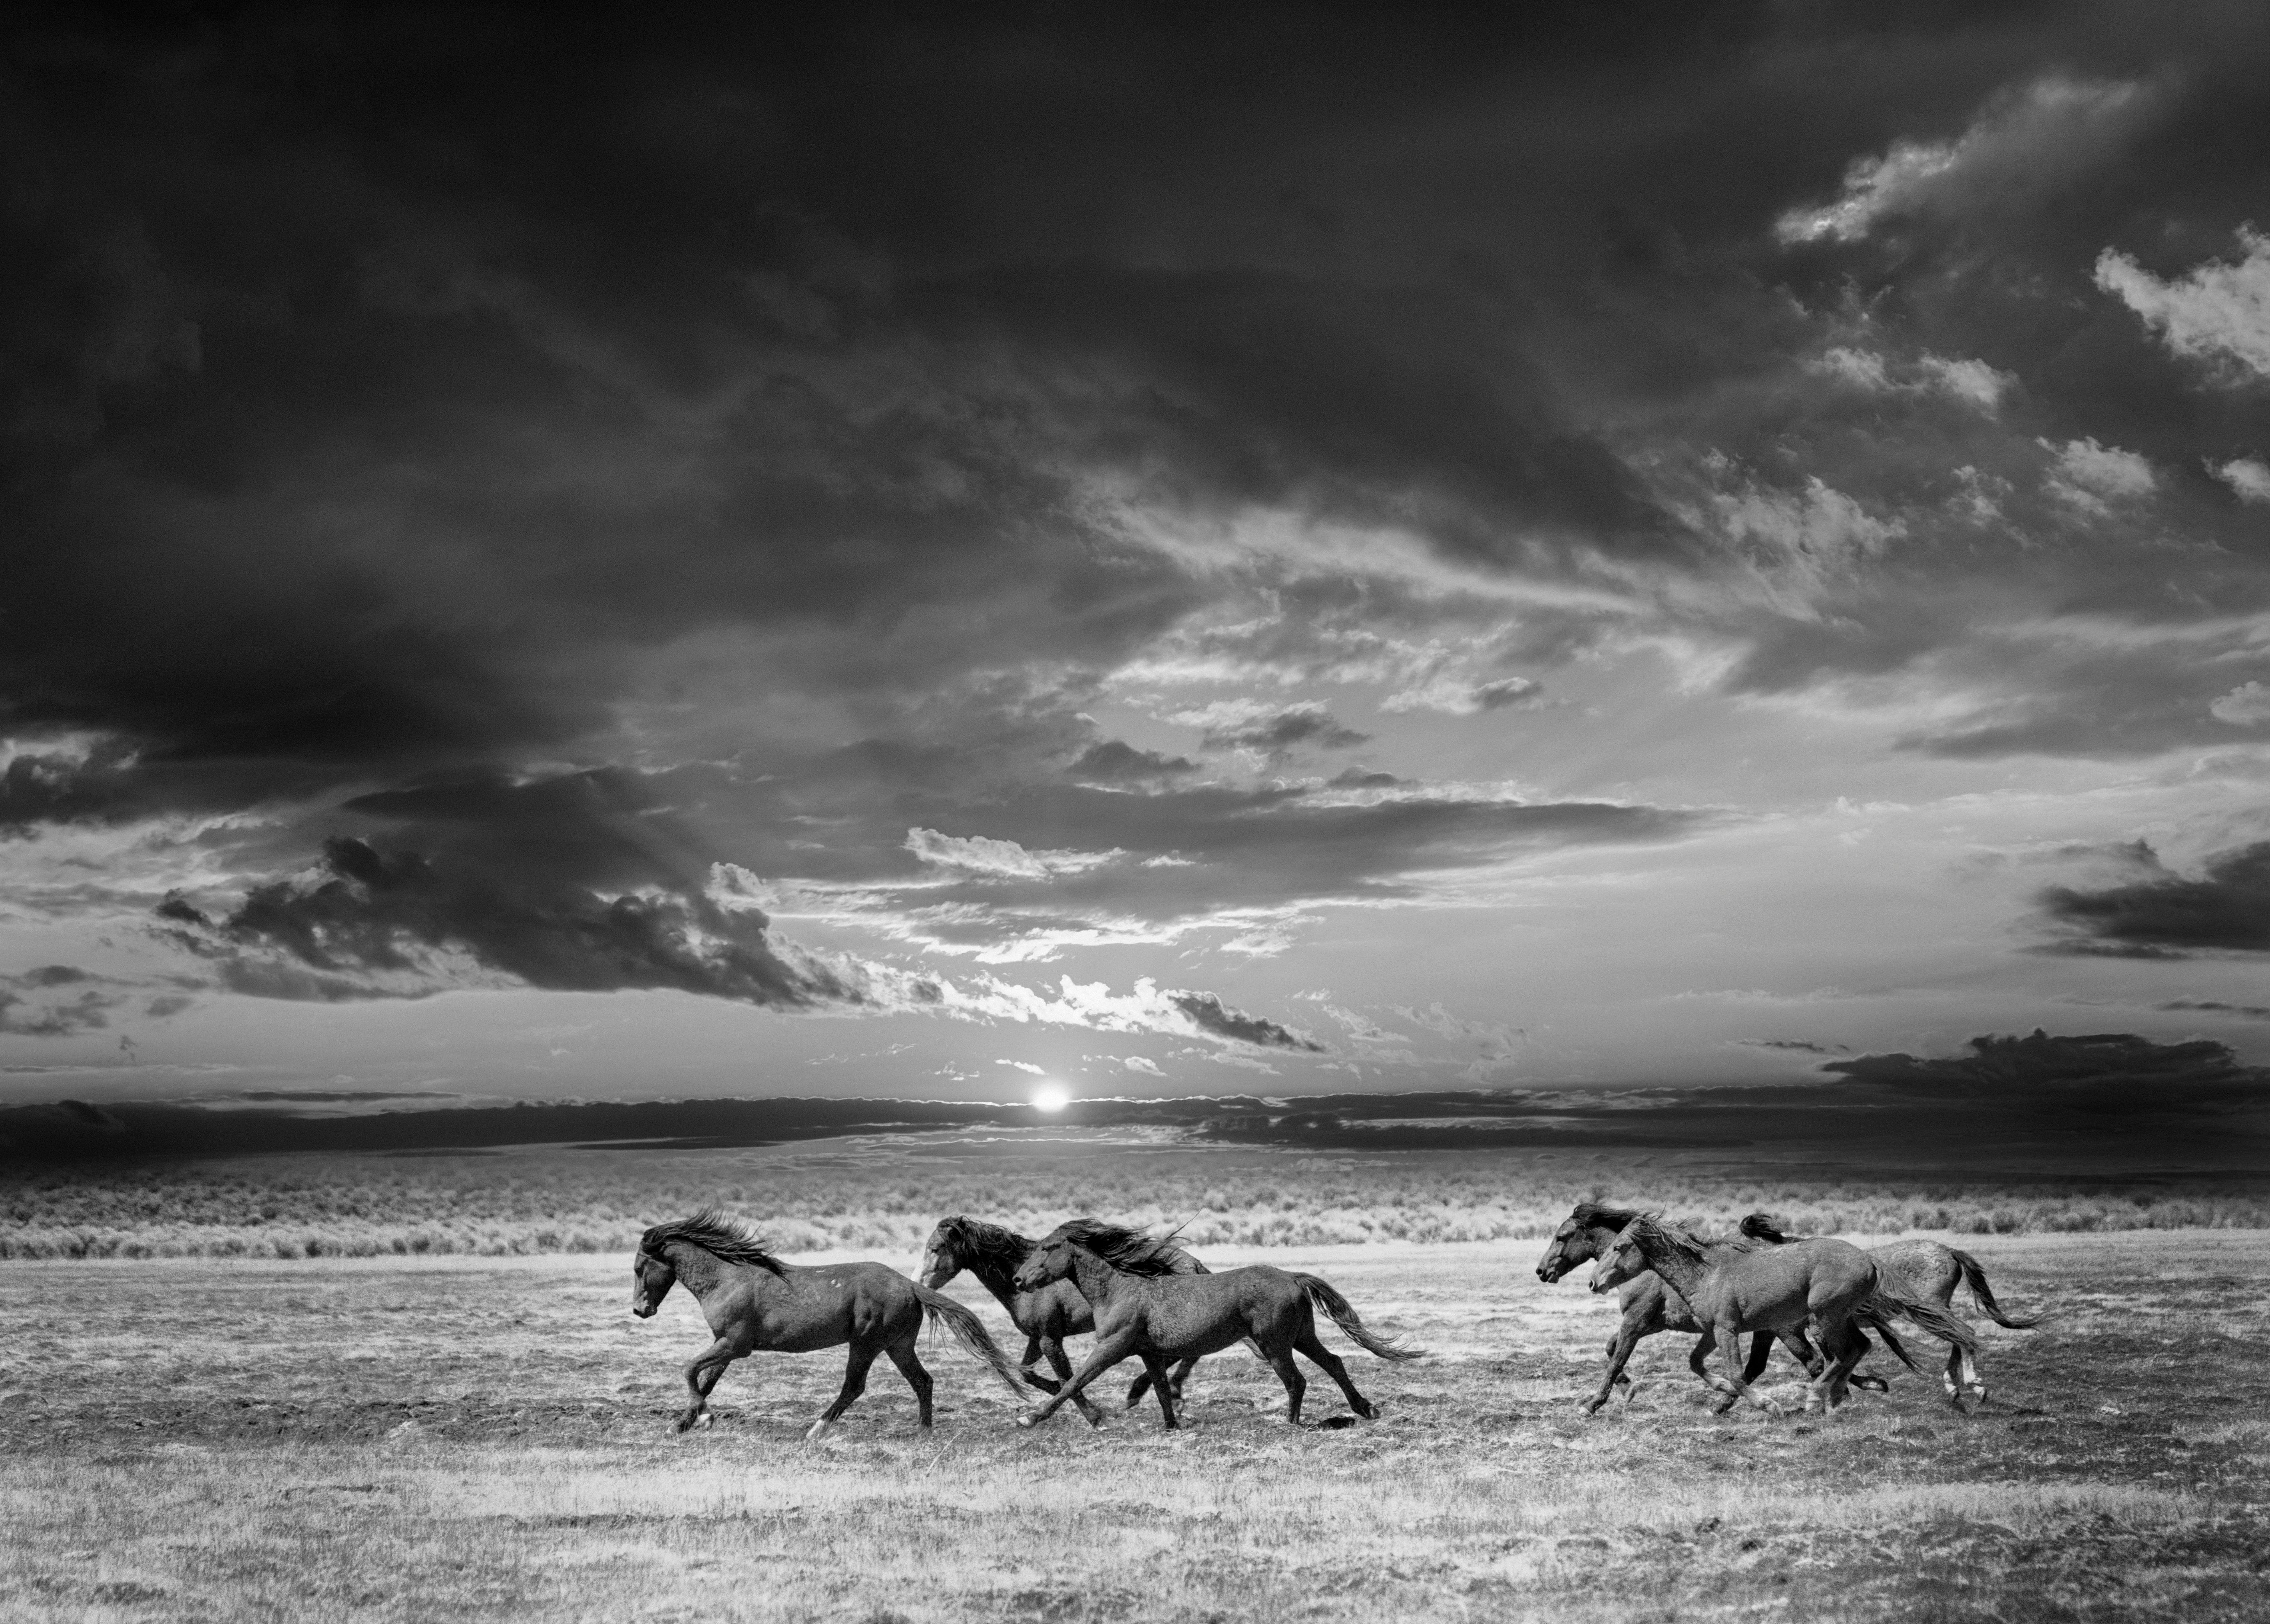 Animal Print Shane Russeck - "The Art Art of Chase, 40x50 Wild Horses, Black and White Photography Mustangs Art